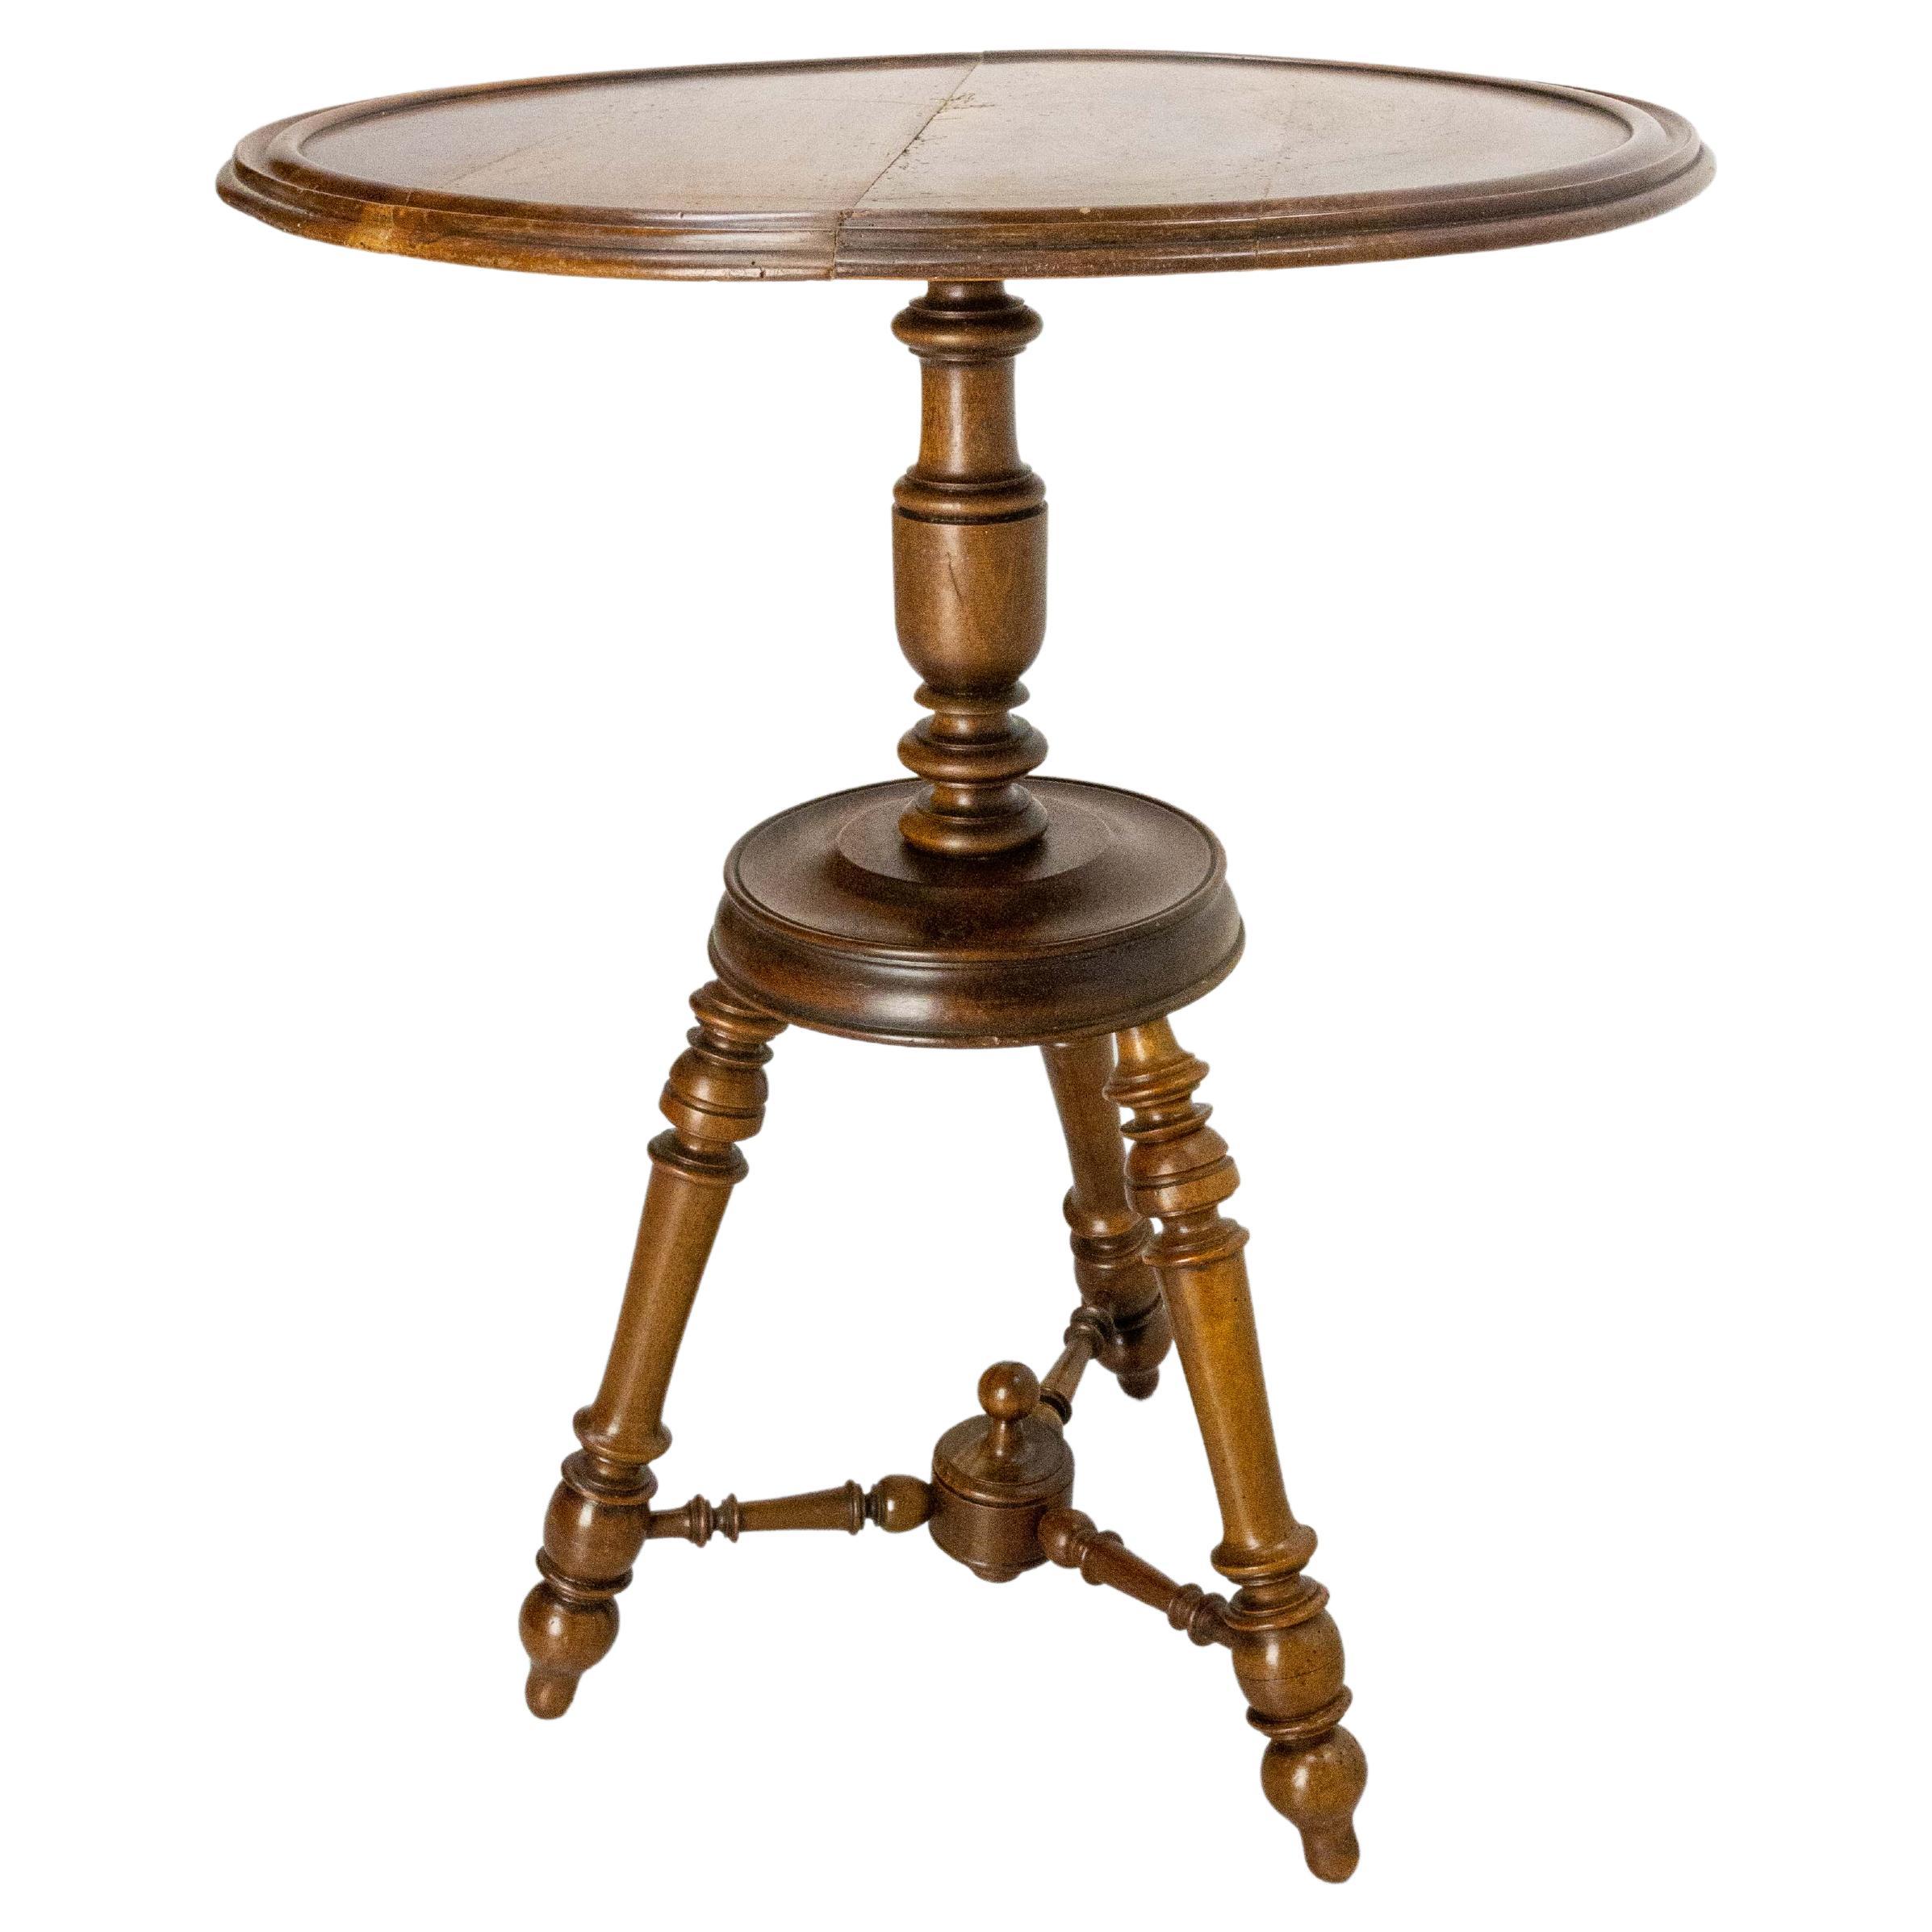 French Walnut Gueridon or Side Table, late 19th Century